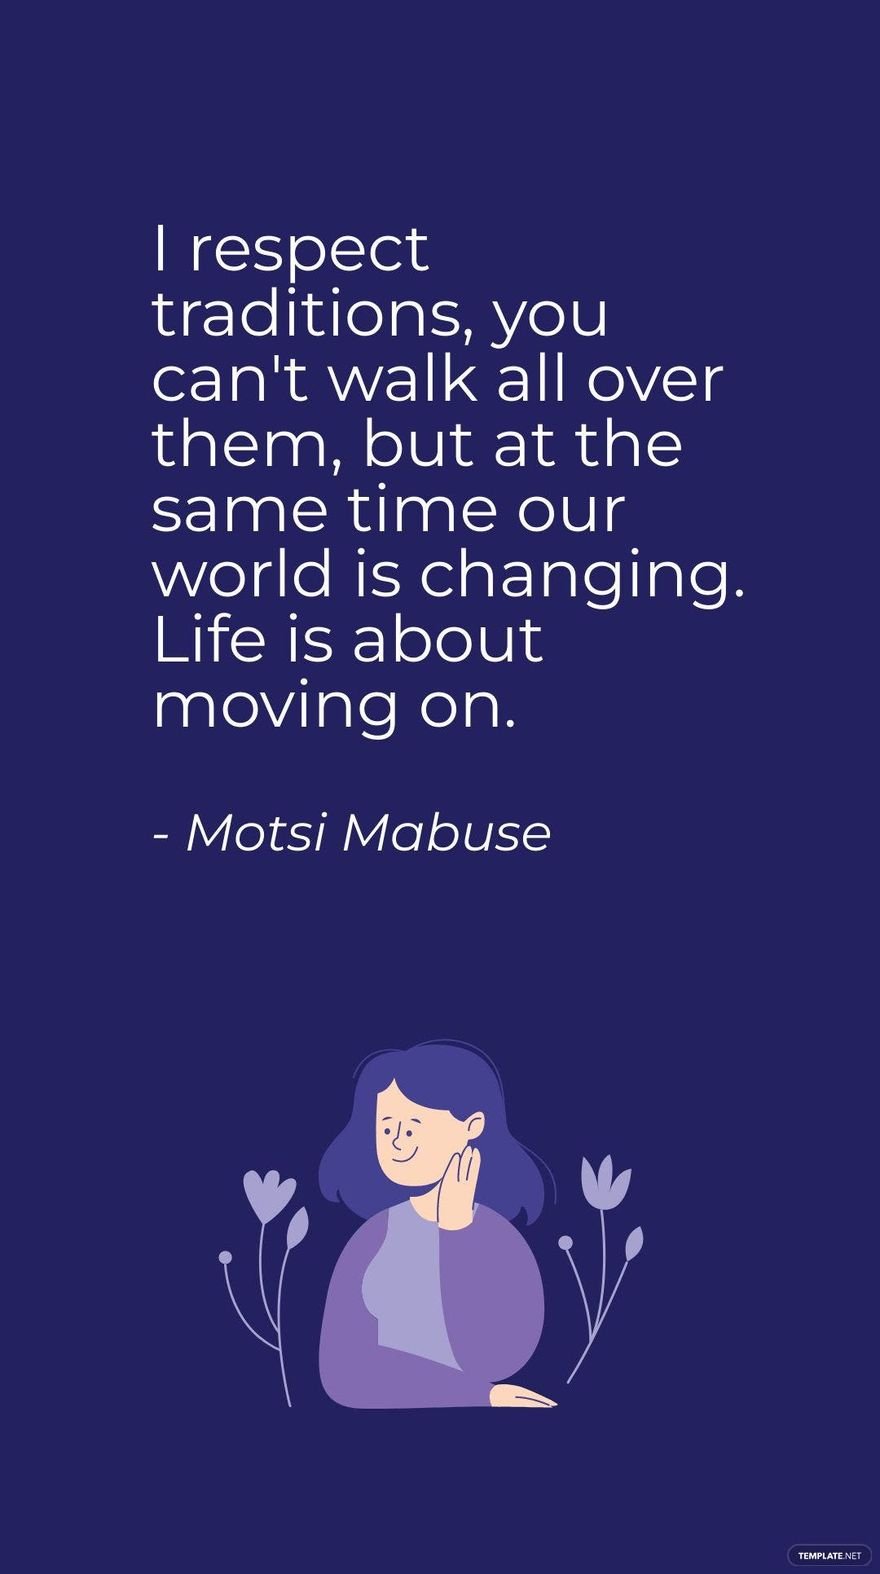 motsi-mabuse-moving-on-quotes